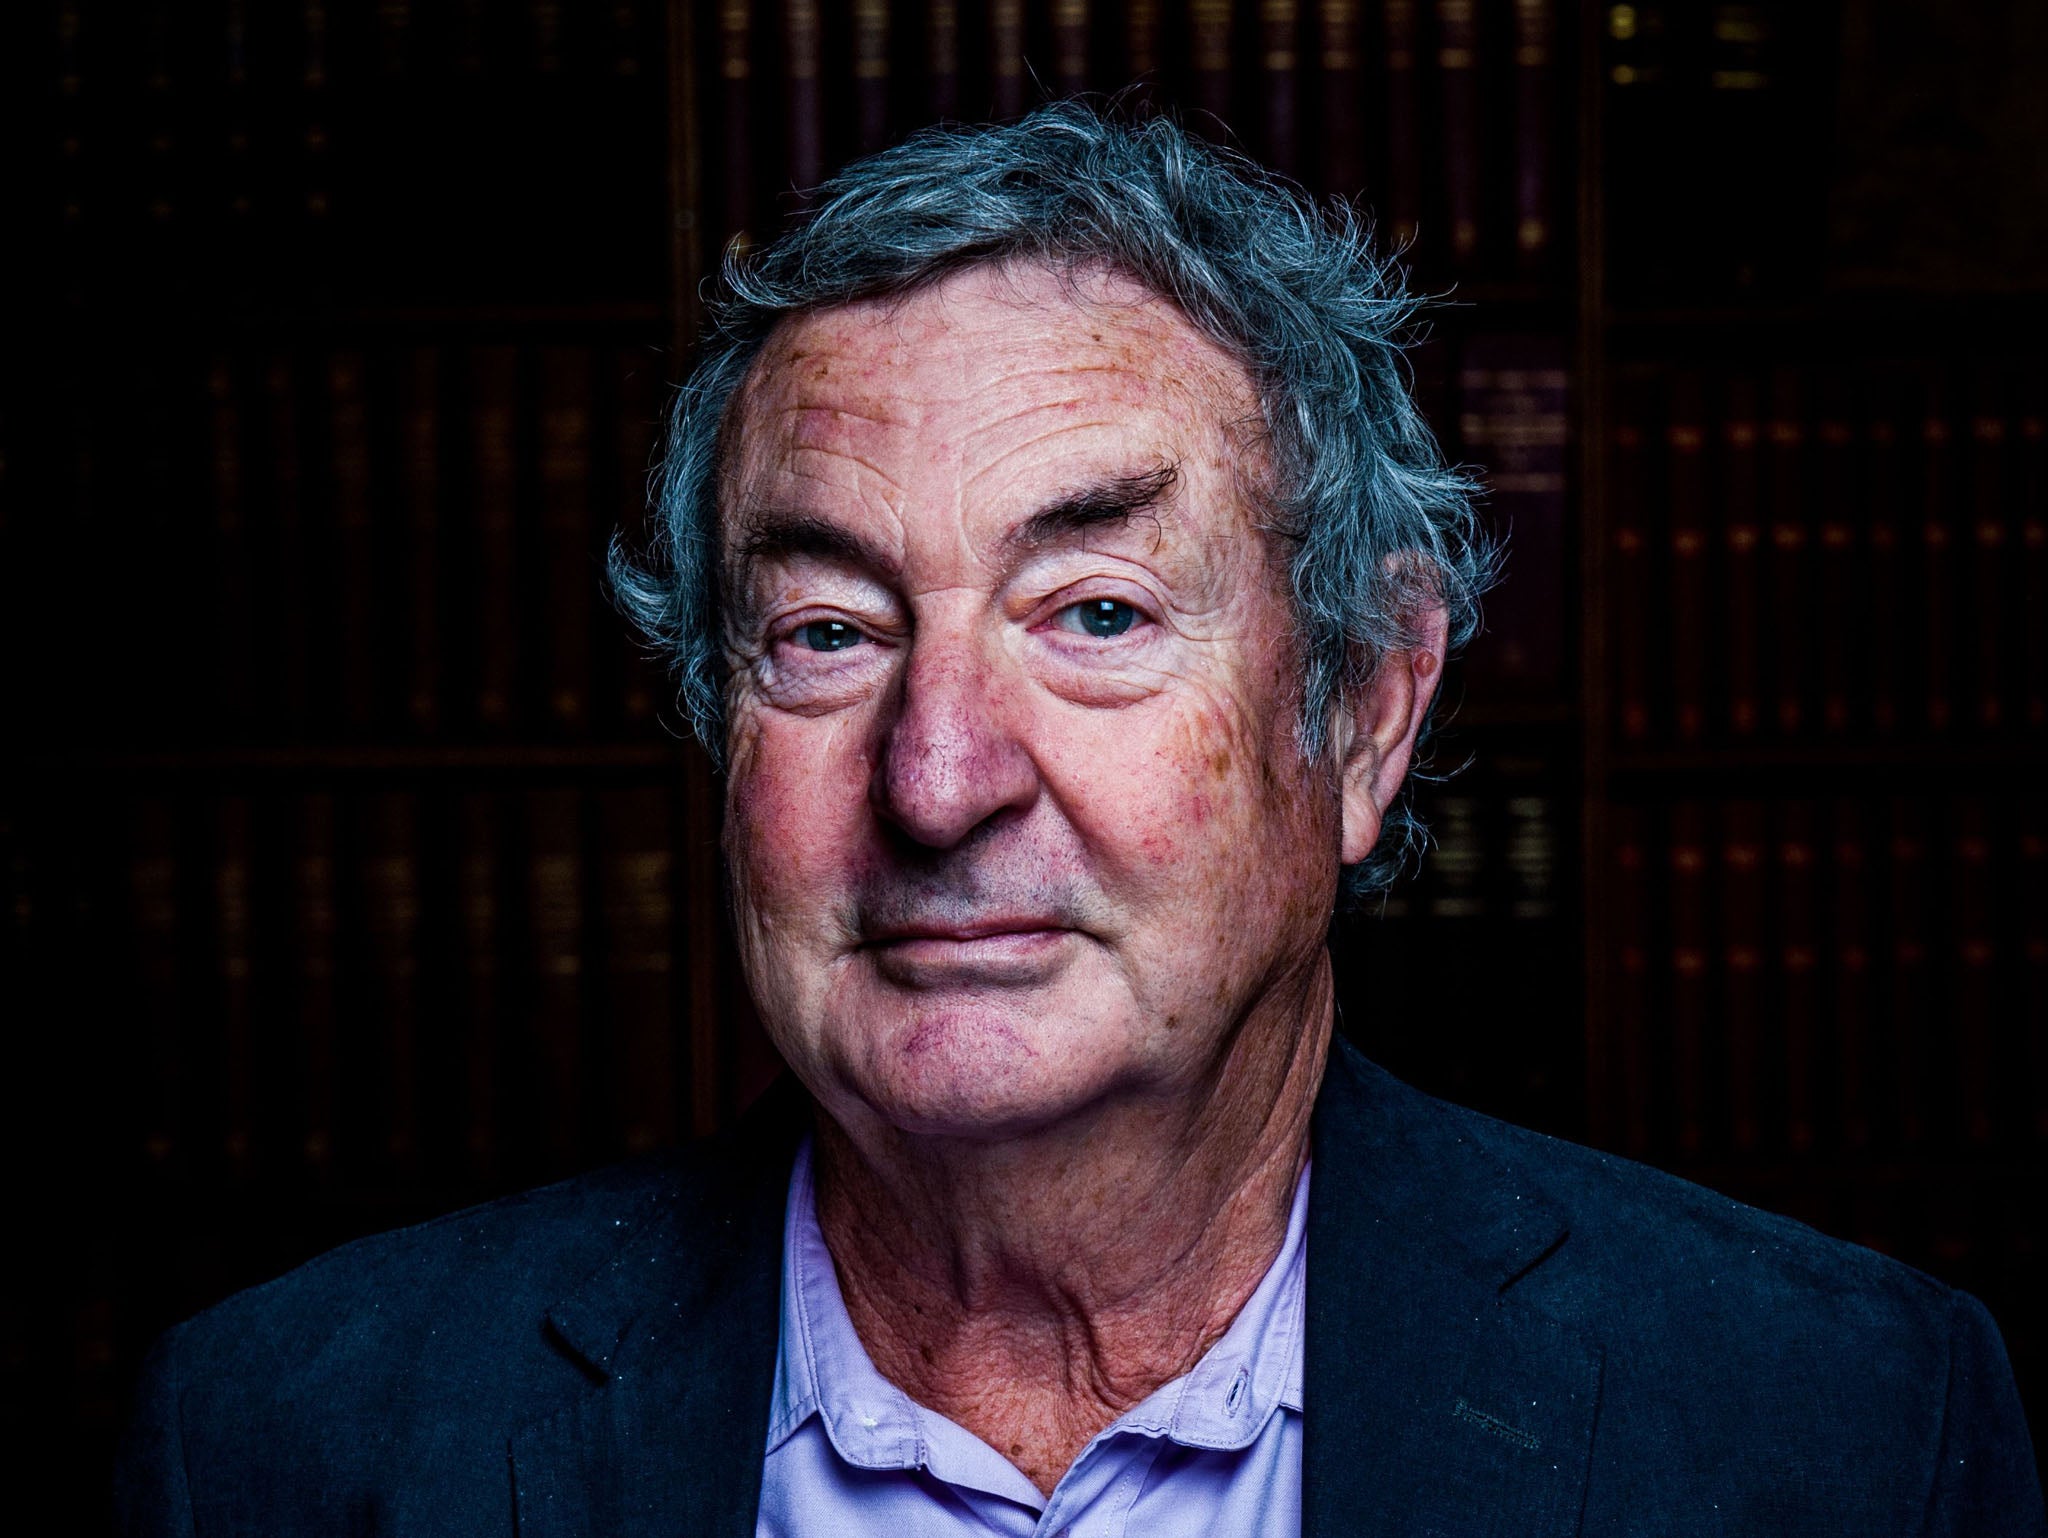 Pink Floyd drummer Nick Mason at the Oxford Union in 2013